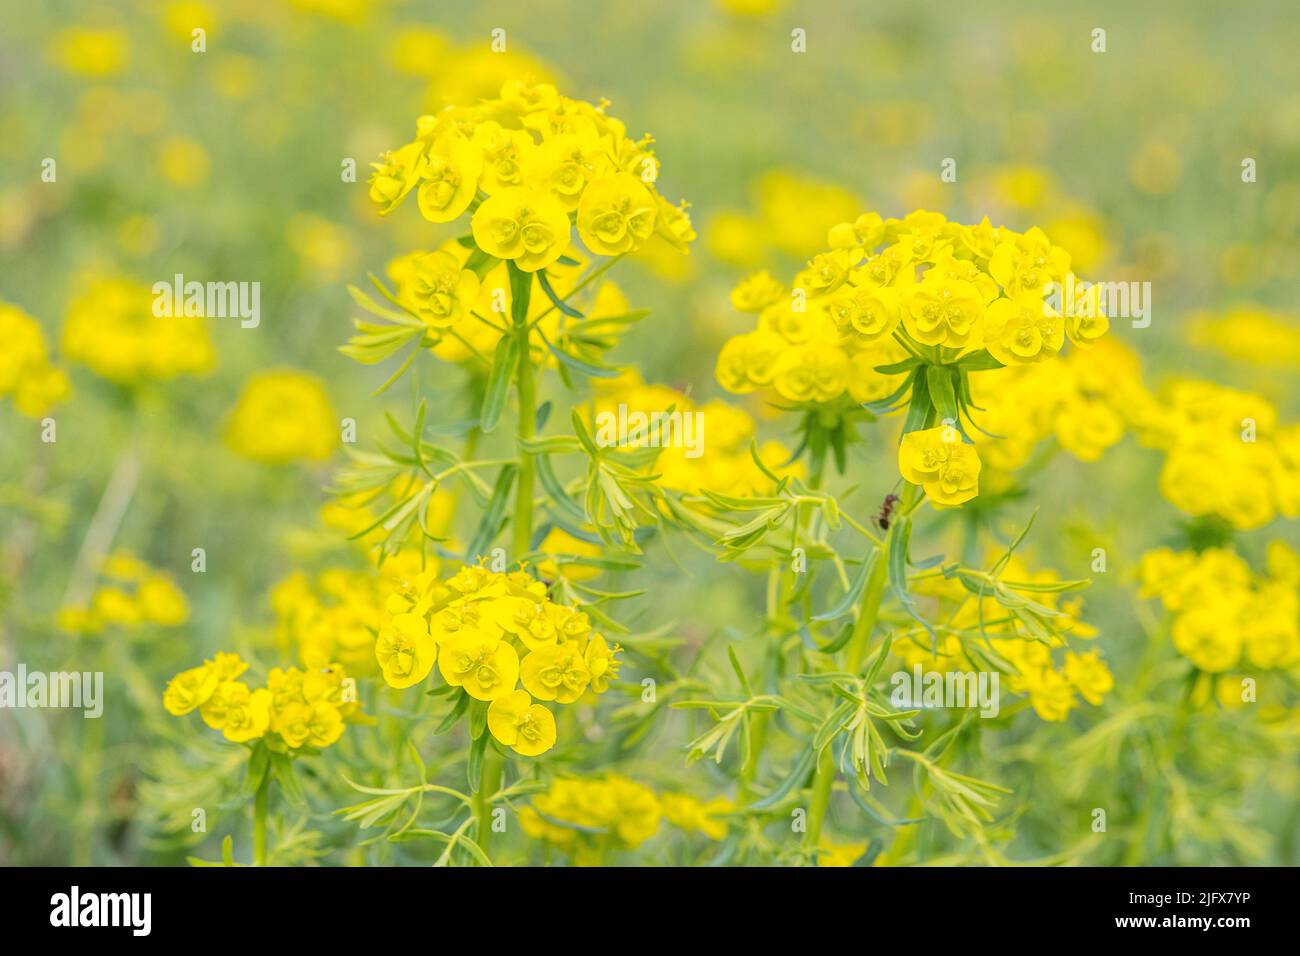 Euphorbia cyparissias, the cypress spurge, is a species of plant in the genus Euphorbia. Stock Photo